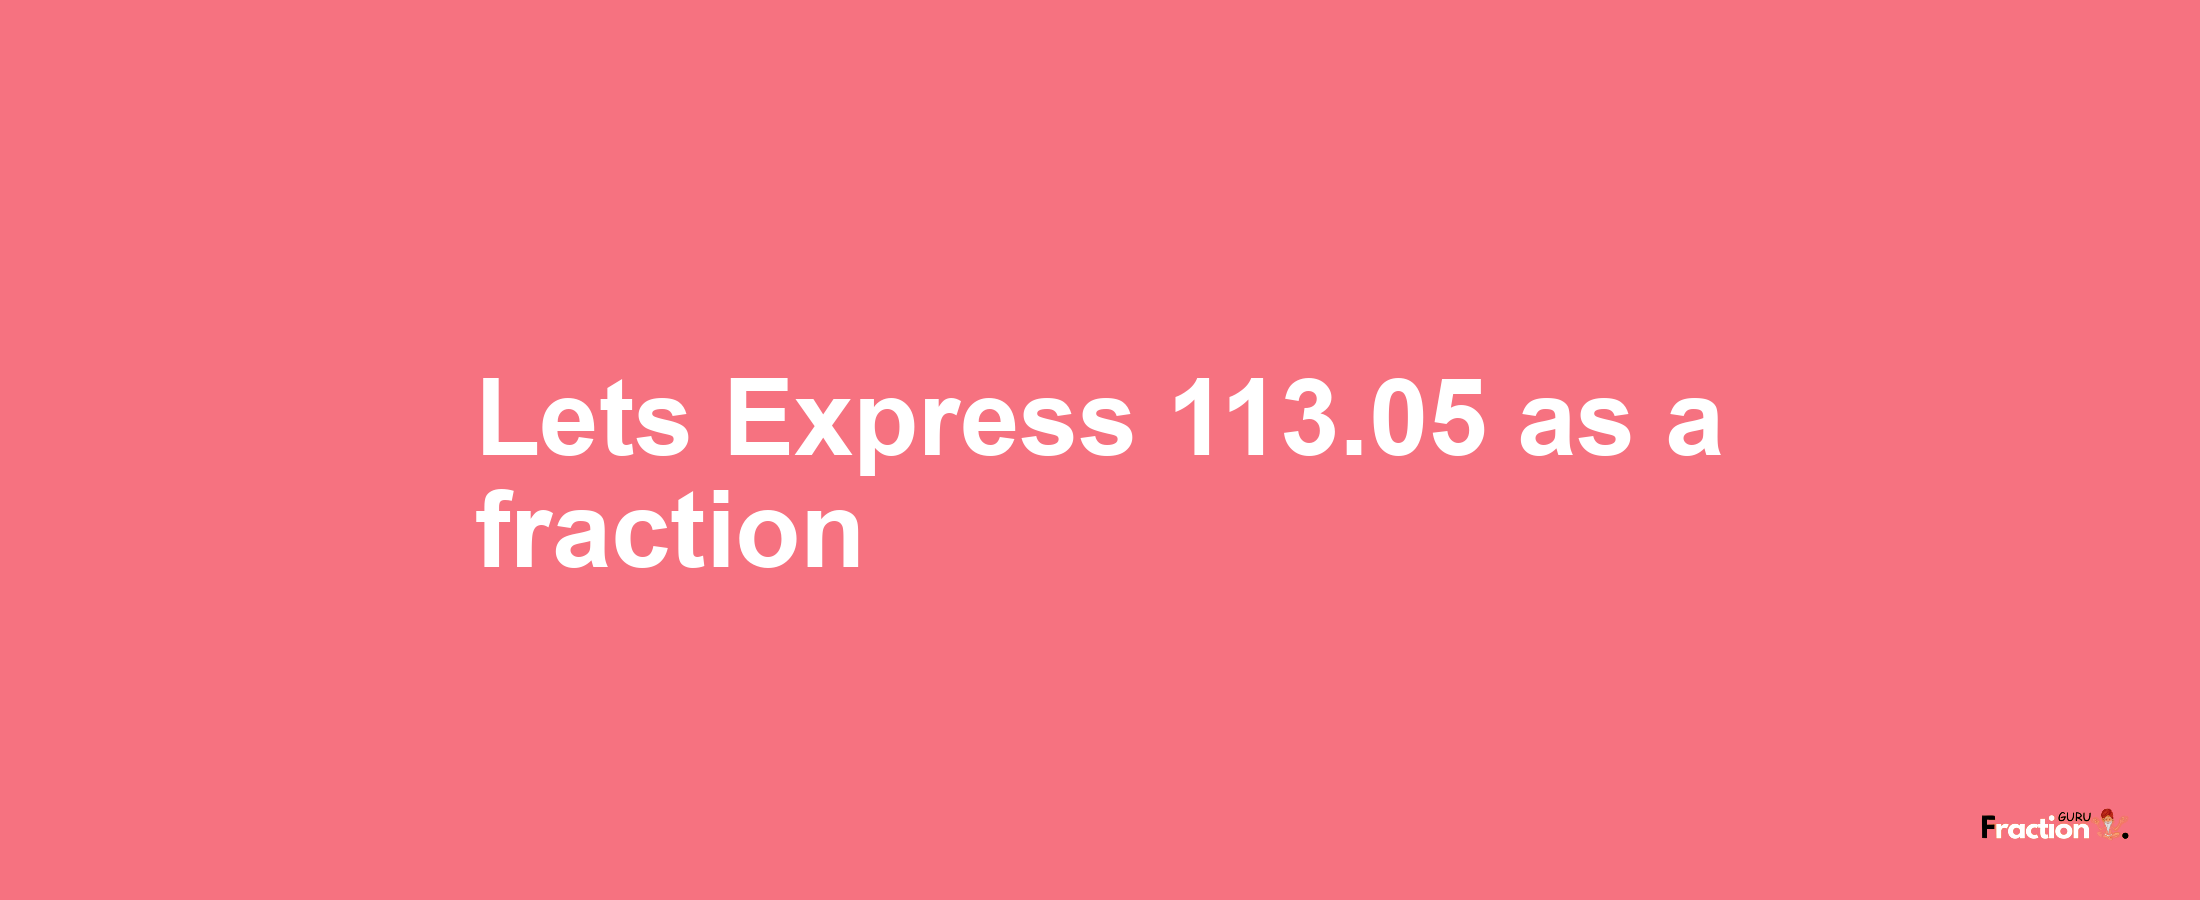 Lets Express 113.05 as afraction